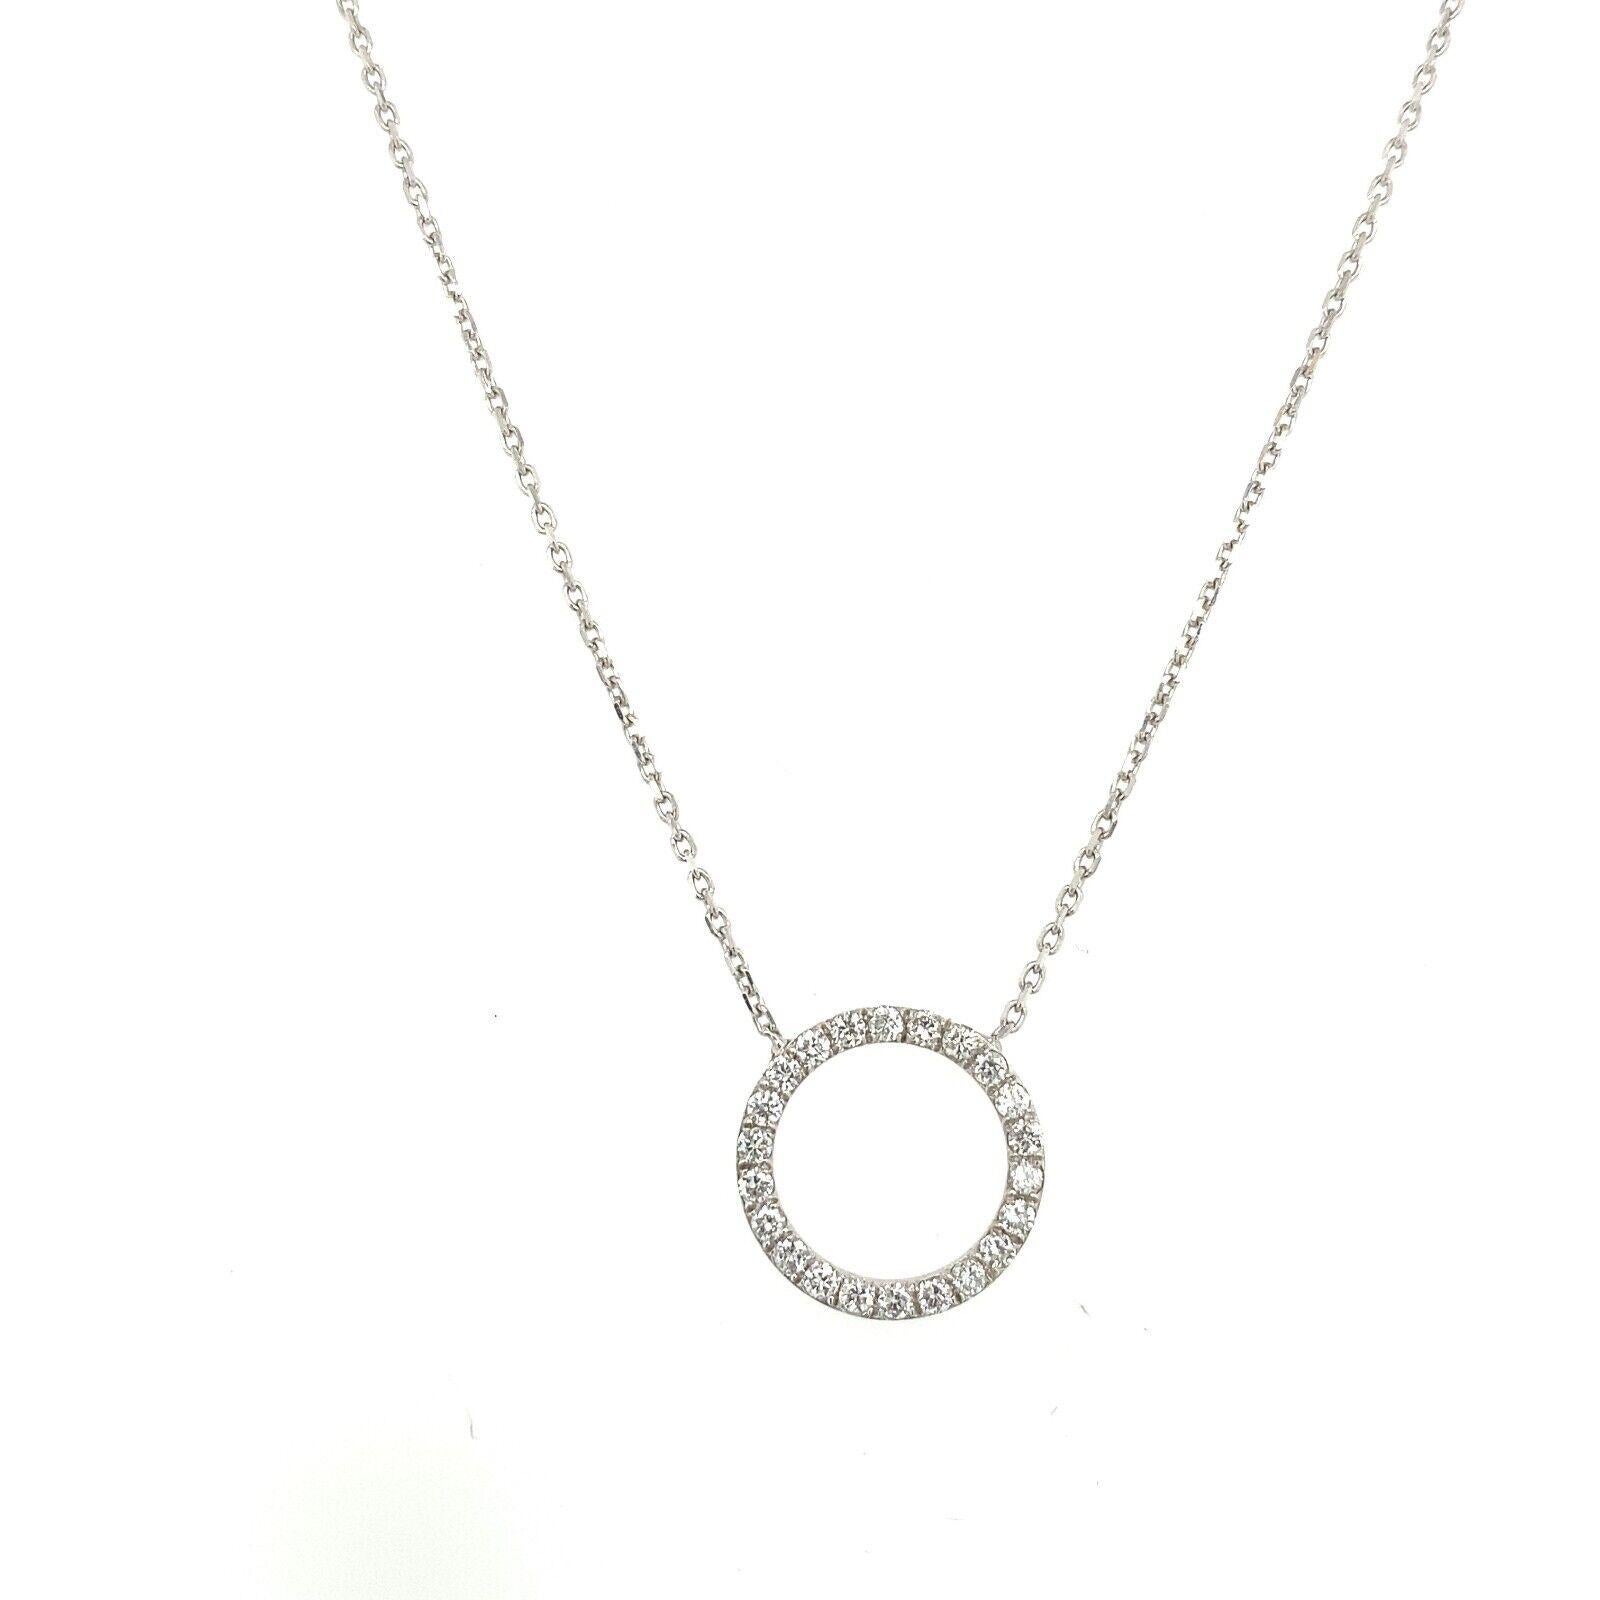 14ct White Gold Circle Of Life Necklace, Set With 0.28ct Of Natural Diamonds

Additional Information:
Total Diamond Weight: 0.28ct
Diamond Colour: G
Diamond Clarity: VS
Total Weight Chain: 2.4g
Pendant Dimension: 12.65mm
SMS4851